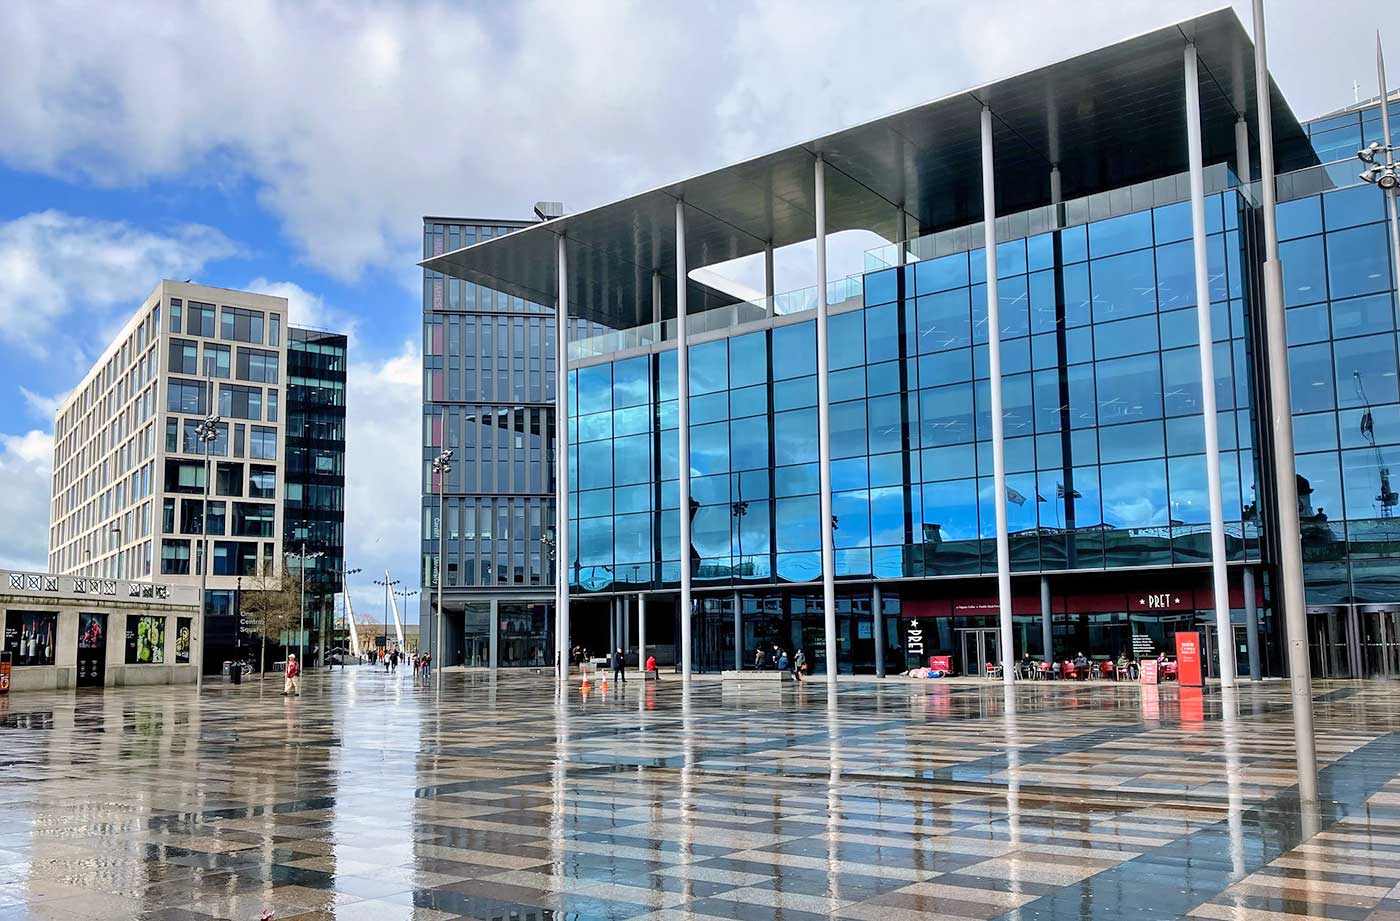 Cardiff City Central Square and BBC Building